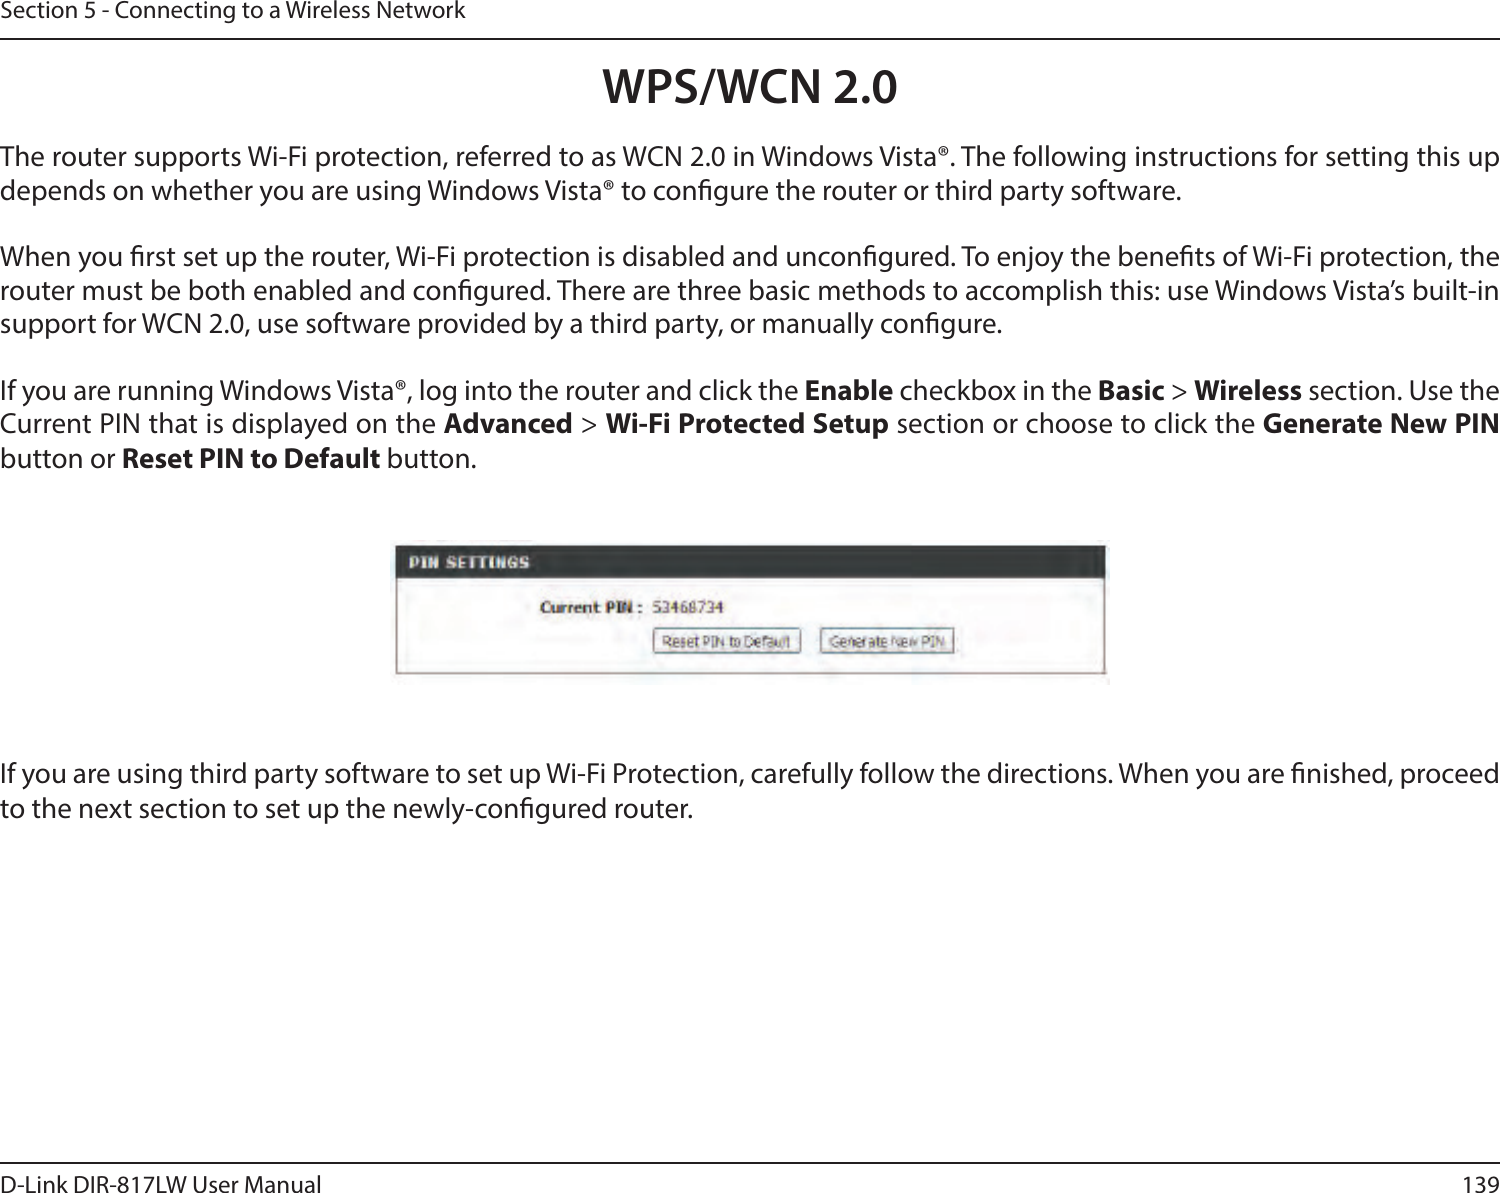 139D-Link DIR-817LW User ManualSection 5 - Connecting to a Wireless NetworkWPS/WCN 2.0The router supports Wi-Fi protection, referred to as WCN 2.0 in Windows Vista®. The following instructions for setting this up depends on whether you are using Windows Vista® to congure the router or third party software.        When you rst set up the router, Wi-Fi protection is disabled and uncongured. To enjoy the benets of Wi-Fi protection, the router must be both enabled and congured. There are three basic methods to accomplish this: use Windows Vista’s built-in support for WCN 2.0, use software provided by a third party, or manually congure. If you are running Windows Vista®, log into the router and click the Enable checkbox in the Basic &gt; Wireless section. Use the Current PIN that is displayed on the Advanced &gt; Wi-Fi Protected Setup section or choose to click the Generate New PIN button or Reset PIN to Default button. If you are using third party software to set up Wi-Fi Protection, carefully follow the directions. When you are nished, proceed to the next section to set up the newly-congured router. 